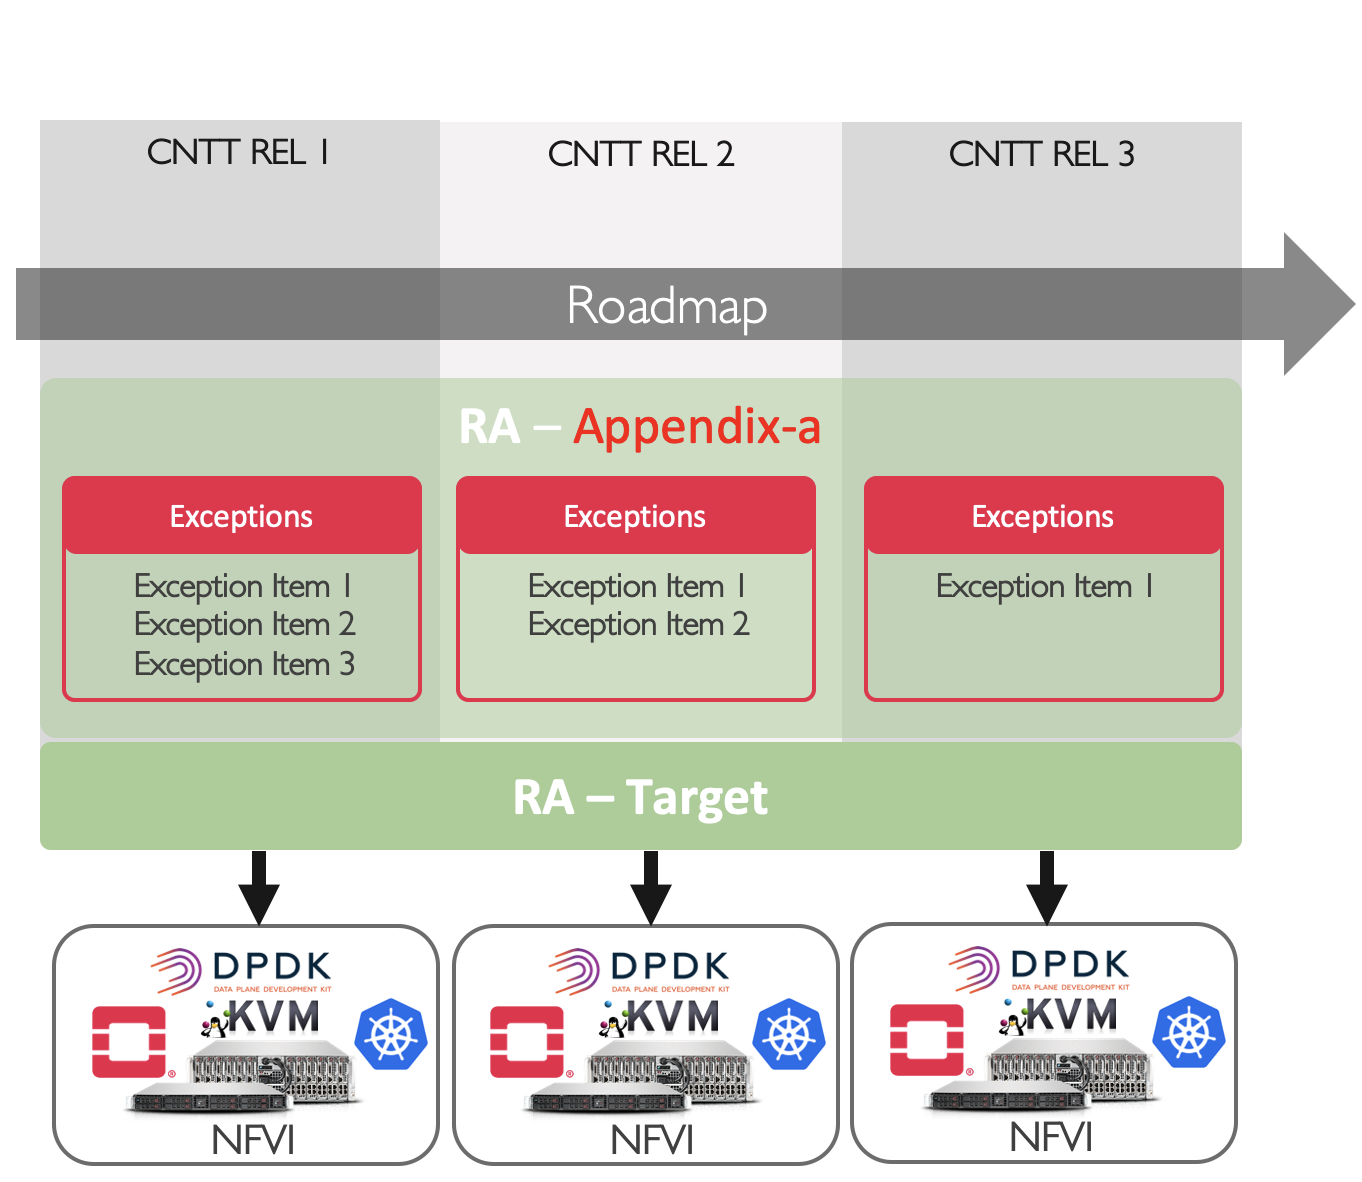 "Figure 1: Transition Plan for cloud infrastructure solutions within Anuket reference specifications"